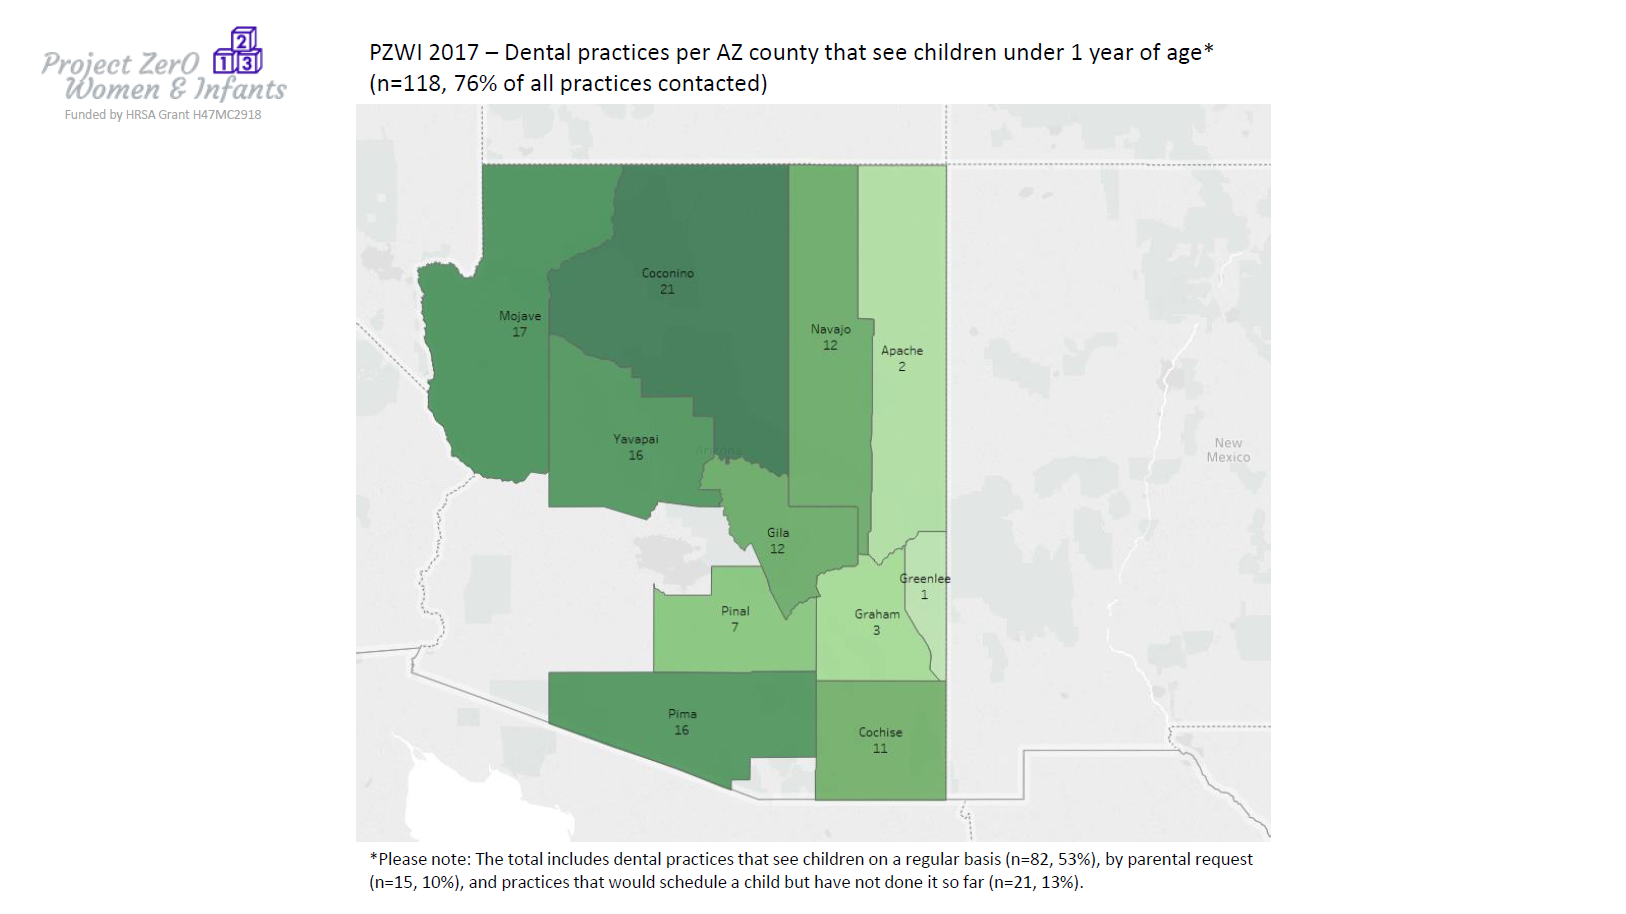 Dental Practices per AZ County that see children under the age of 1